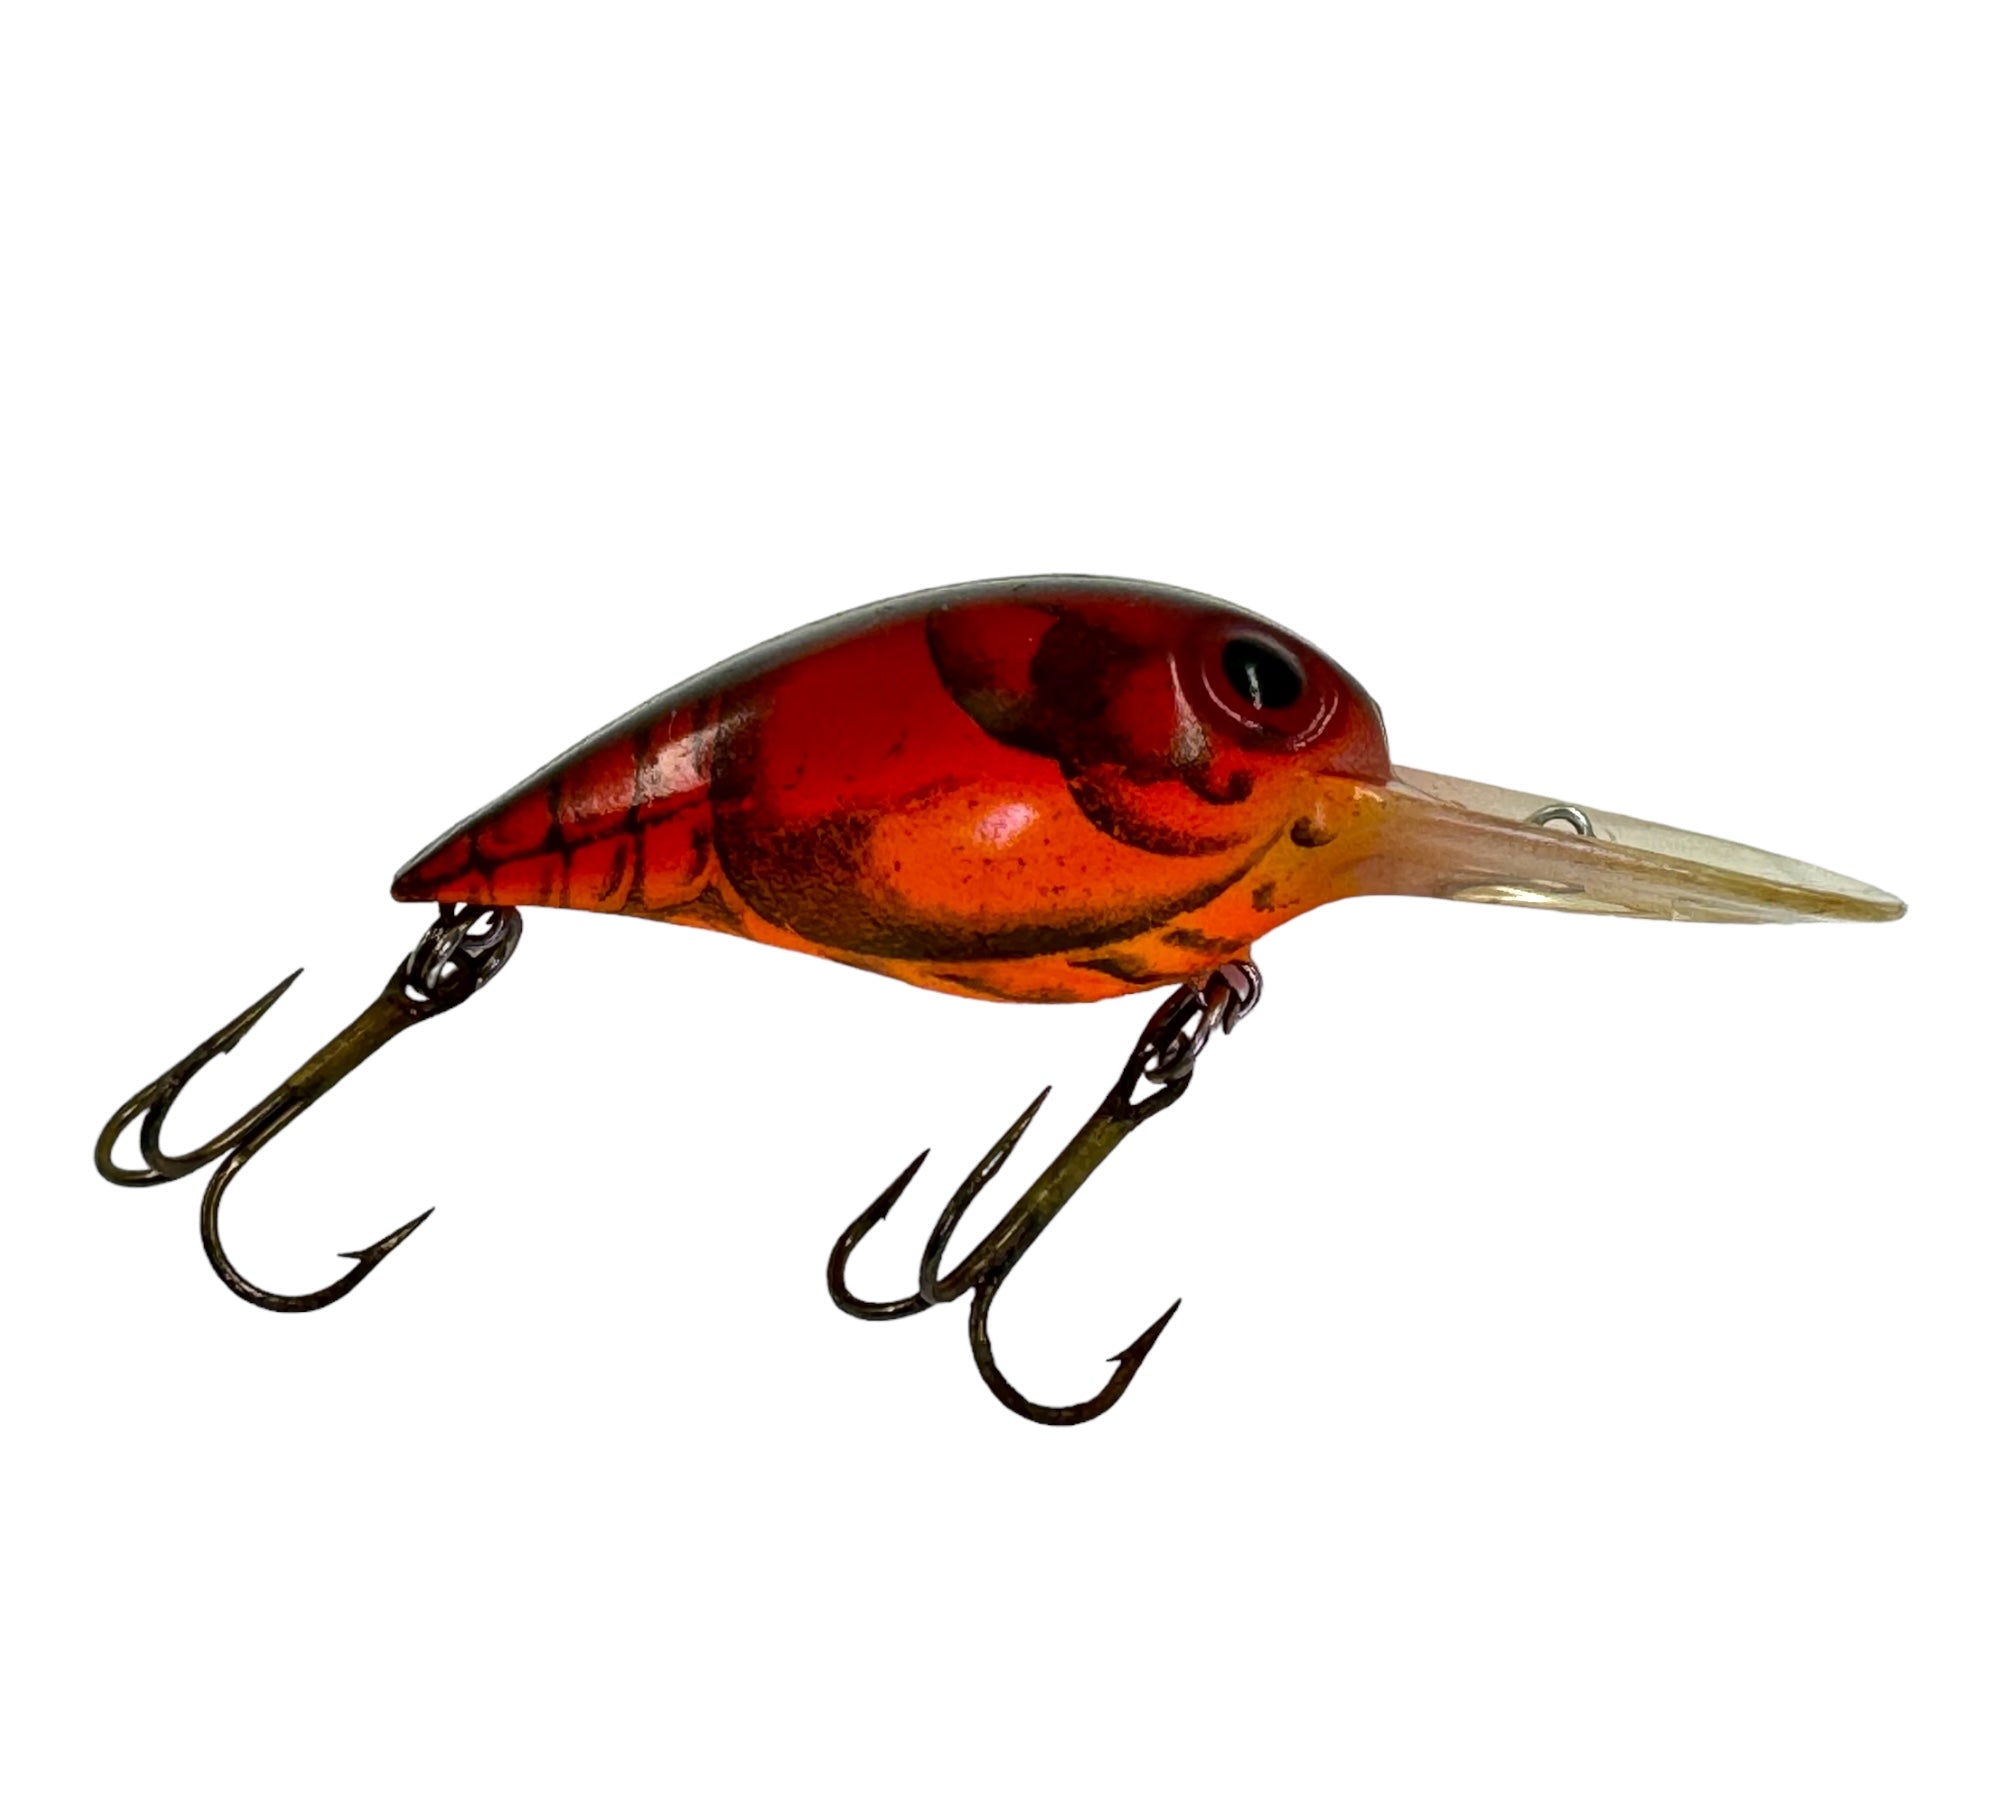 STORM LURES WIGGLE WART Fishing Lure • # V 209 RED CRAWFISH – Toad